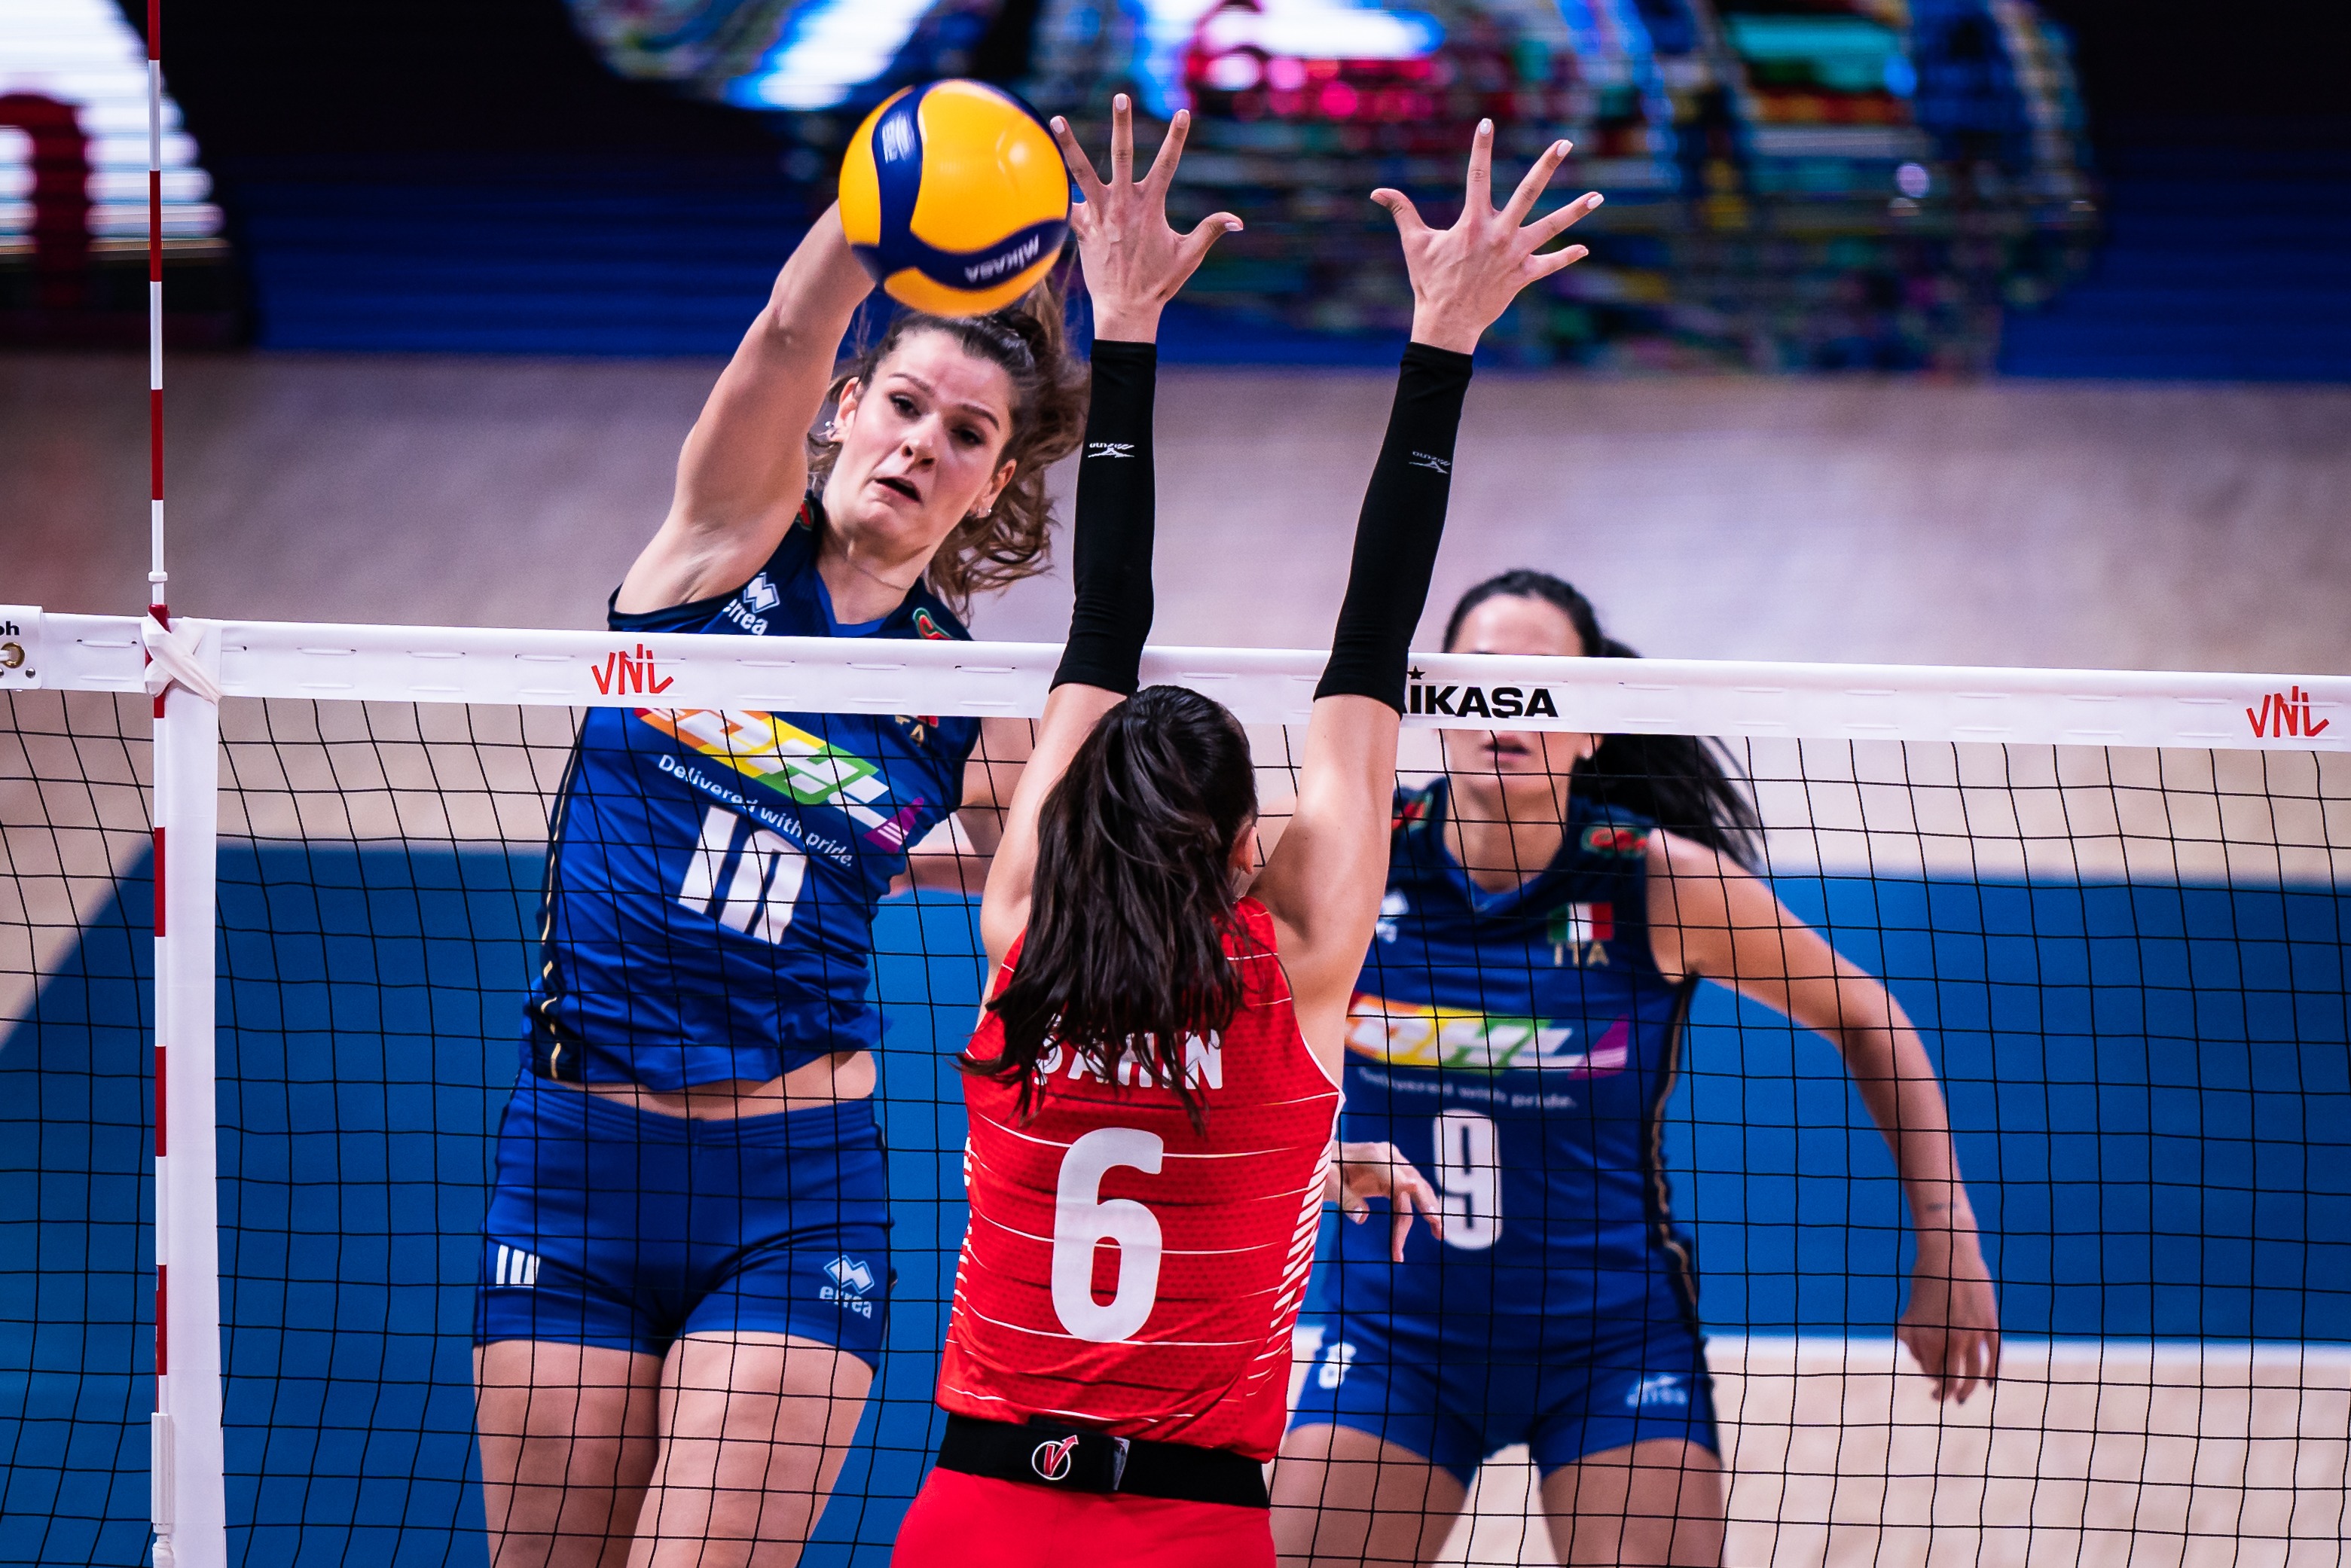 Italy aim for World Championship double